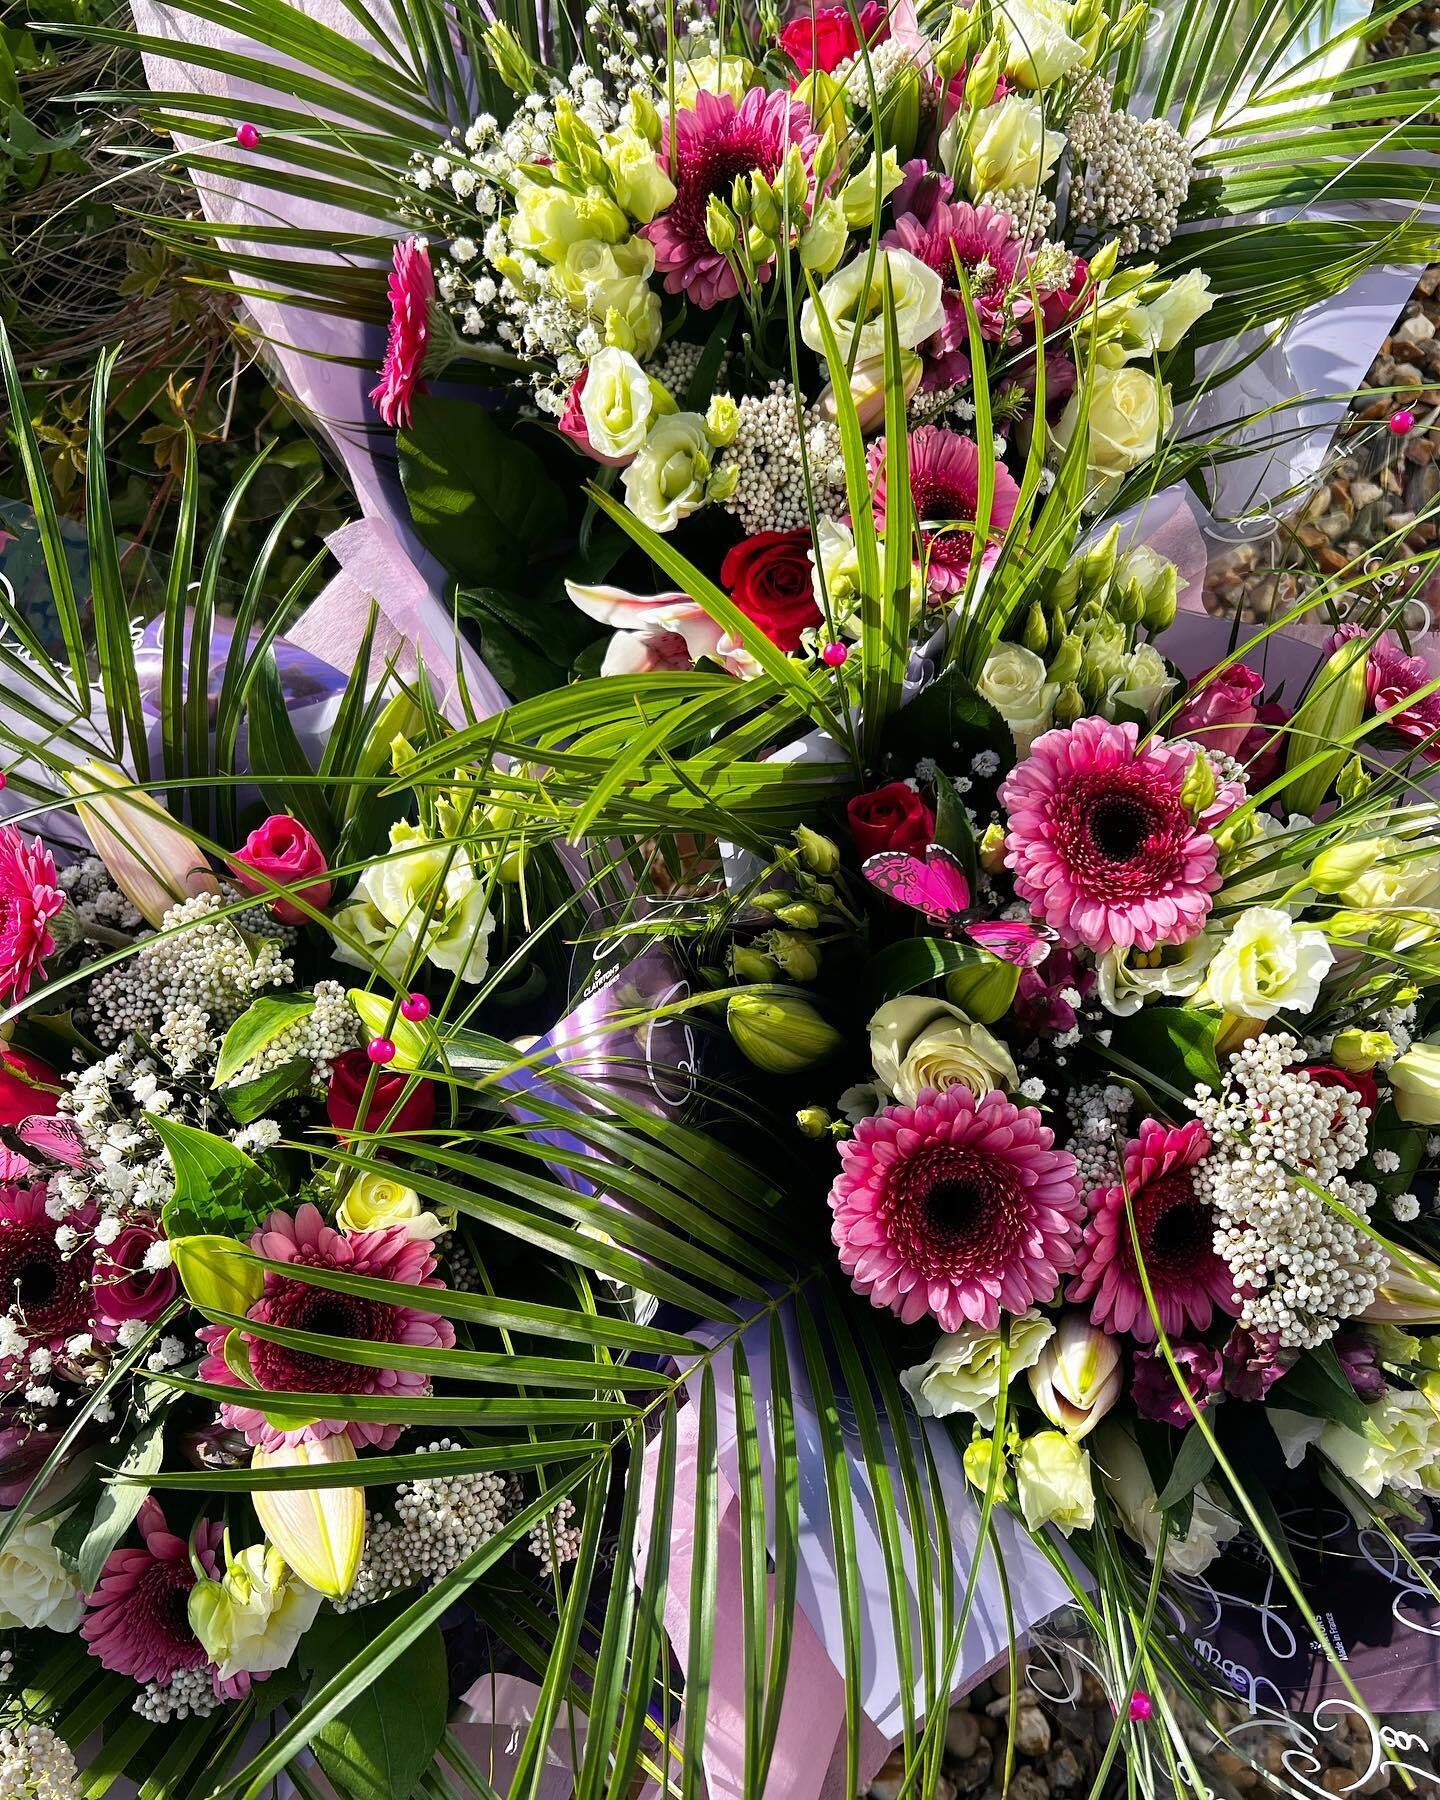 Sun is shining 🌞- flowers are shining 💐 

Flowers for every occasion with FREE local delivery. DM to order 
.
.
.

#floirstnearme #denbigshireflorist #floristnorthwales #floralinstallation #floralinspiration #flowerdelivery #flowerdeliverynorthwale